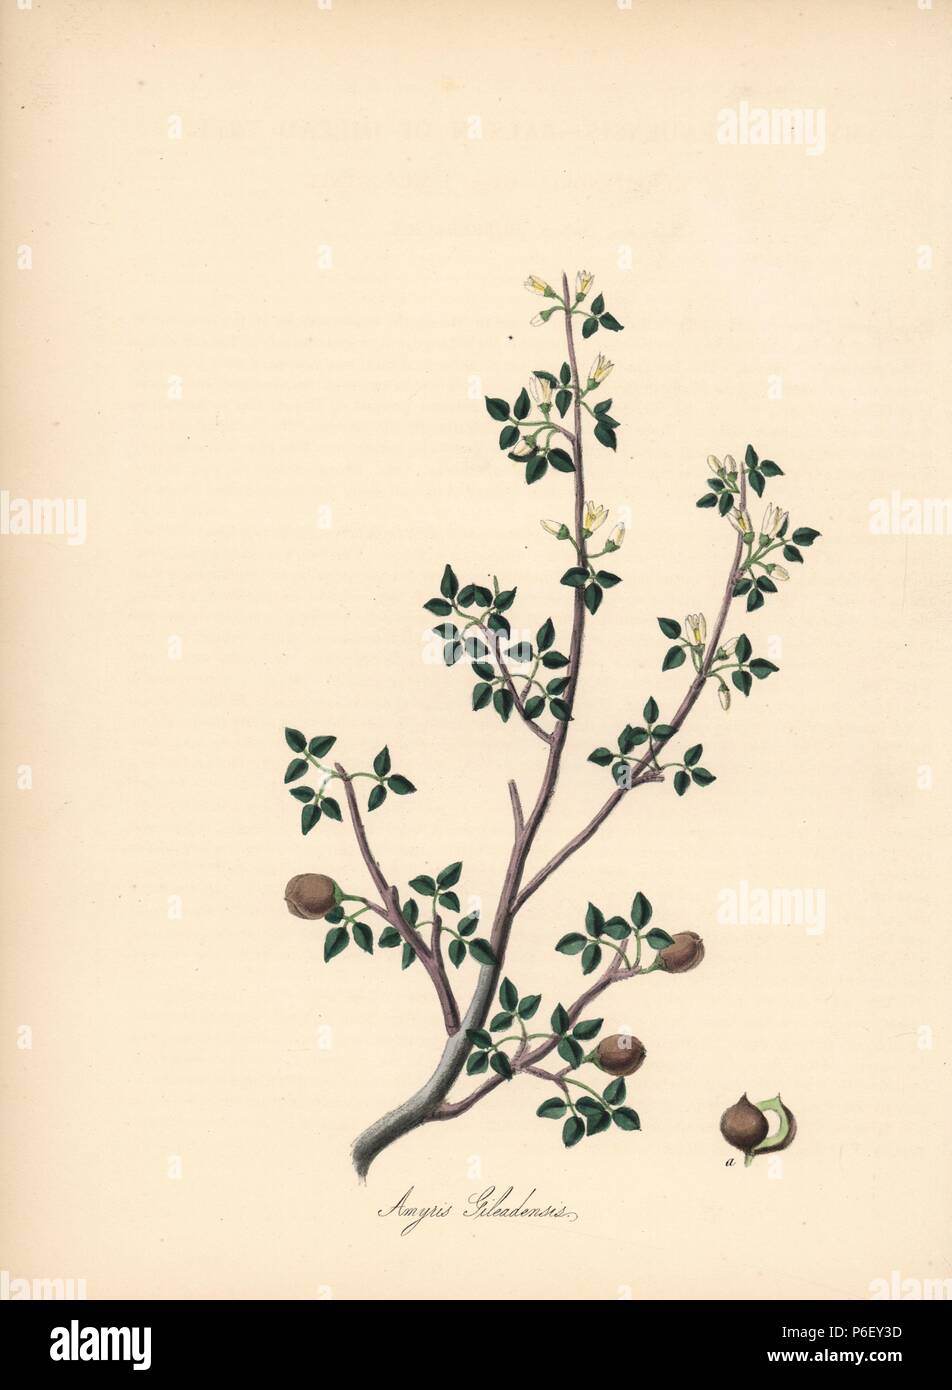 Balsam of Gilead tree, Commiphora gileadensis. Handcoloured zincograph by C. Chabot drawn by Miss M. A. Burnett from her 'Plantae Utiliores: or Illustrations of Useful Plants,' Whittaker, London, 1842. Miss Burnett drew the botanical illustrations, but the text was chiefly by her late brother, British botanist Gilbert Thomas Burnett (1800-1835). Stock Photo